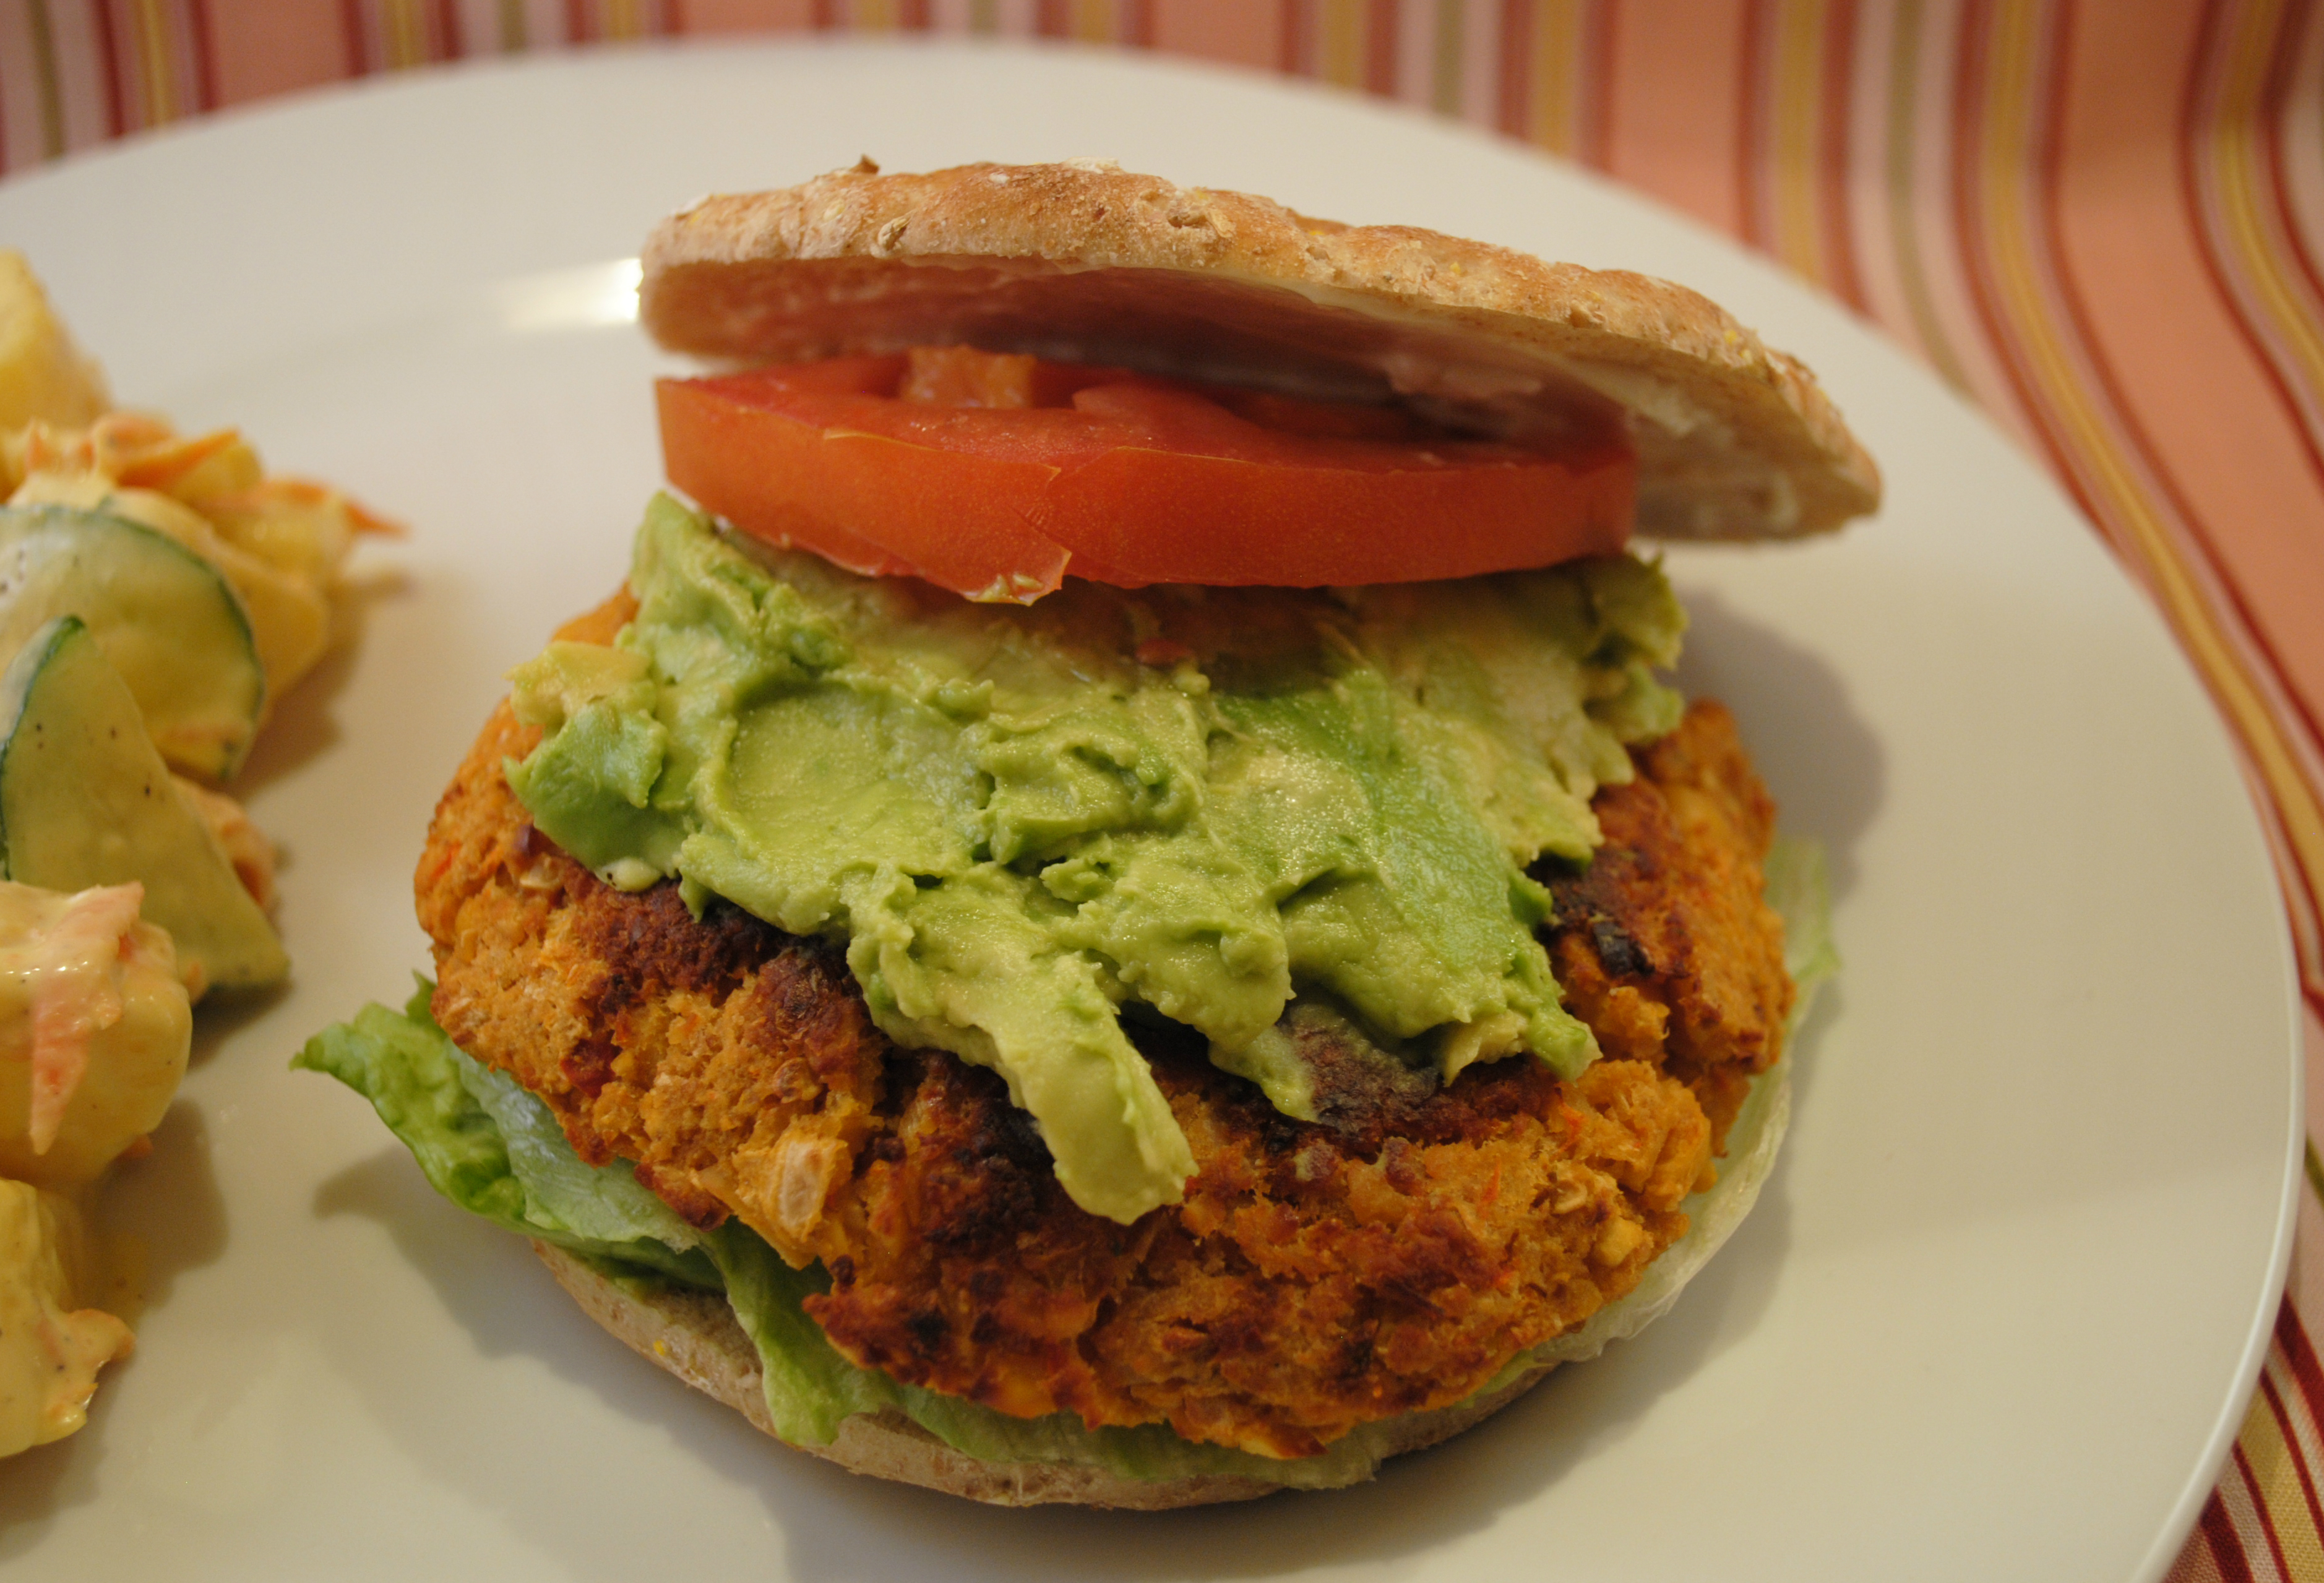 Spicy Chickpea Burgers